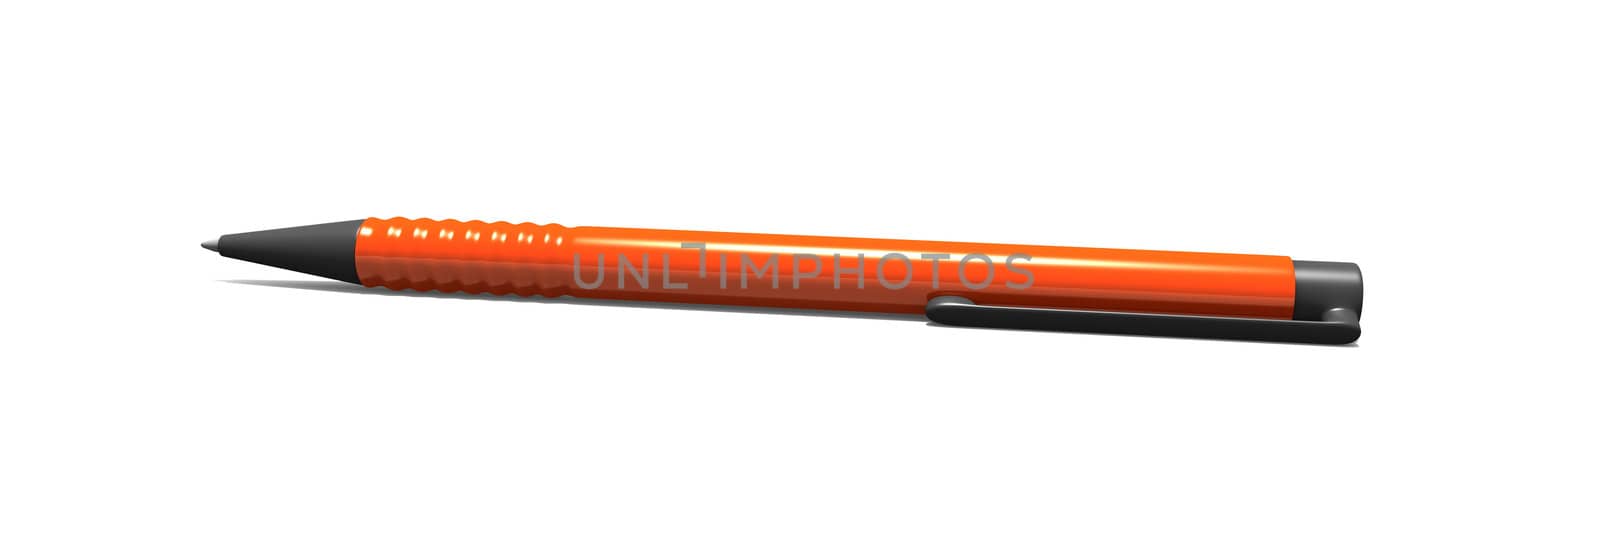 An image of an isolated typical orange ball pen